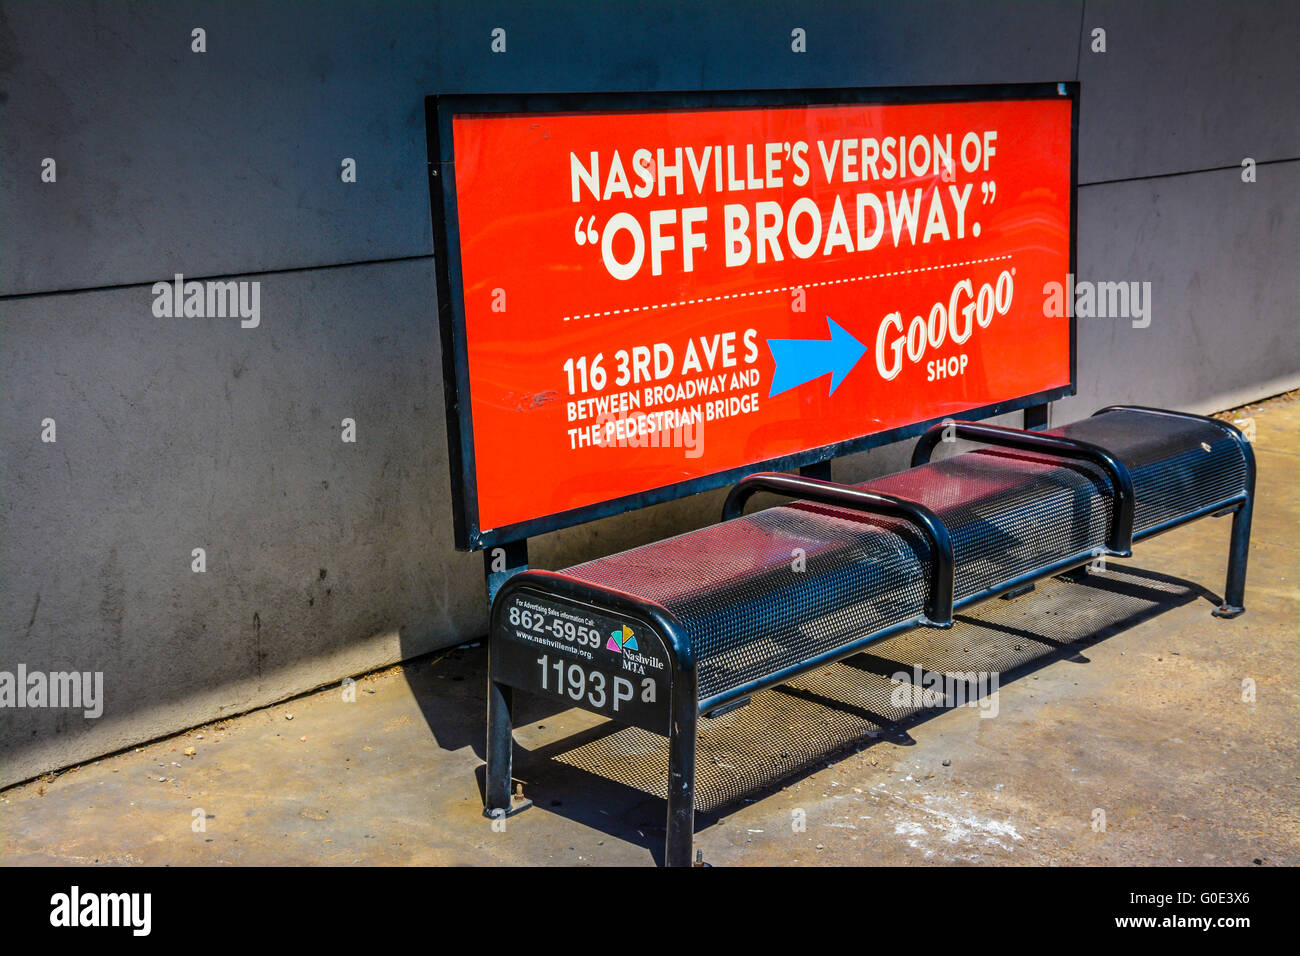 Graphic black and red city bus bench with amusing advertising slogan for Goo Goo candy Shop on 3rd Ave S in Nashville, TN Stock Photo